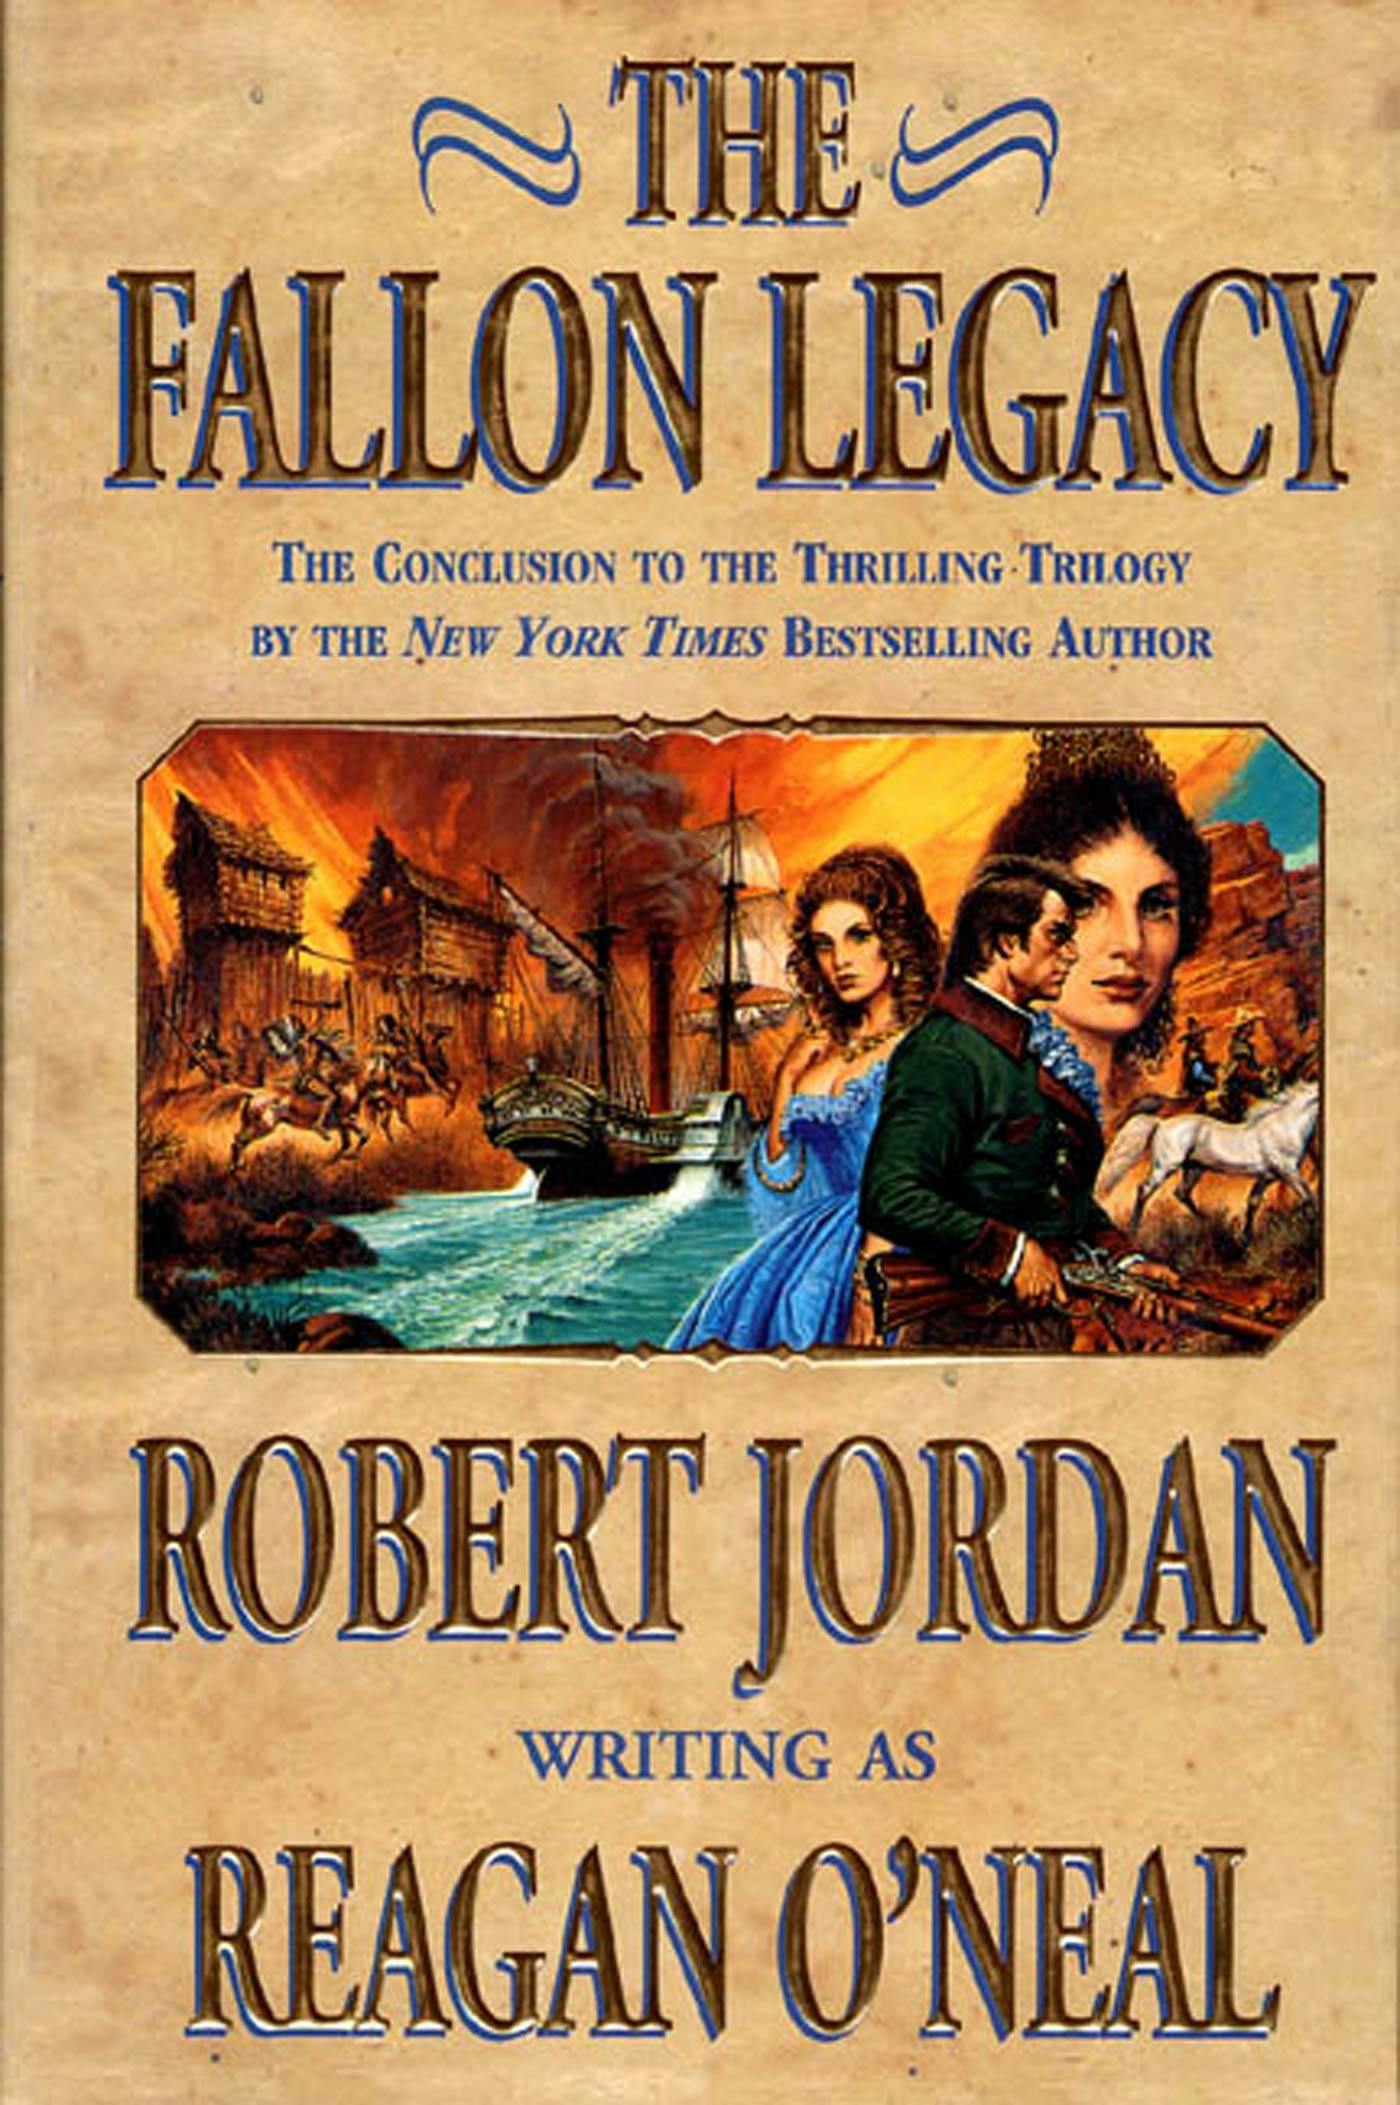 Cover for the book titled as: The Fallon Legacy